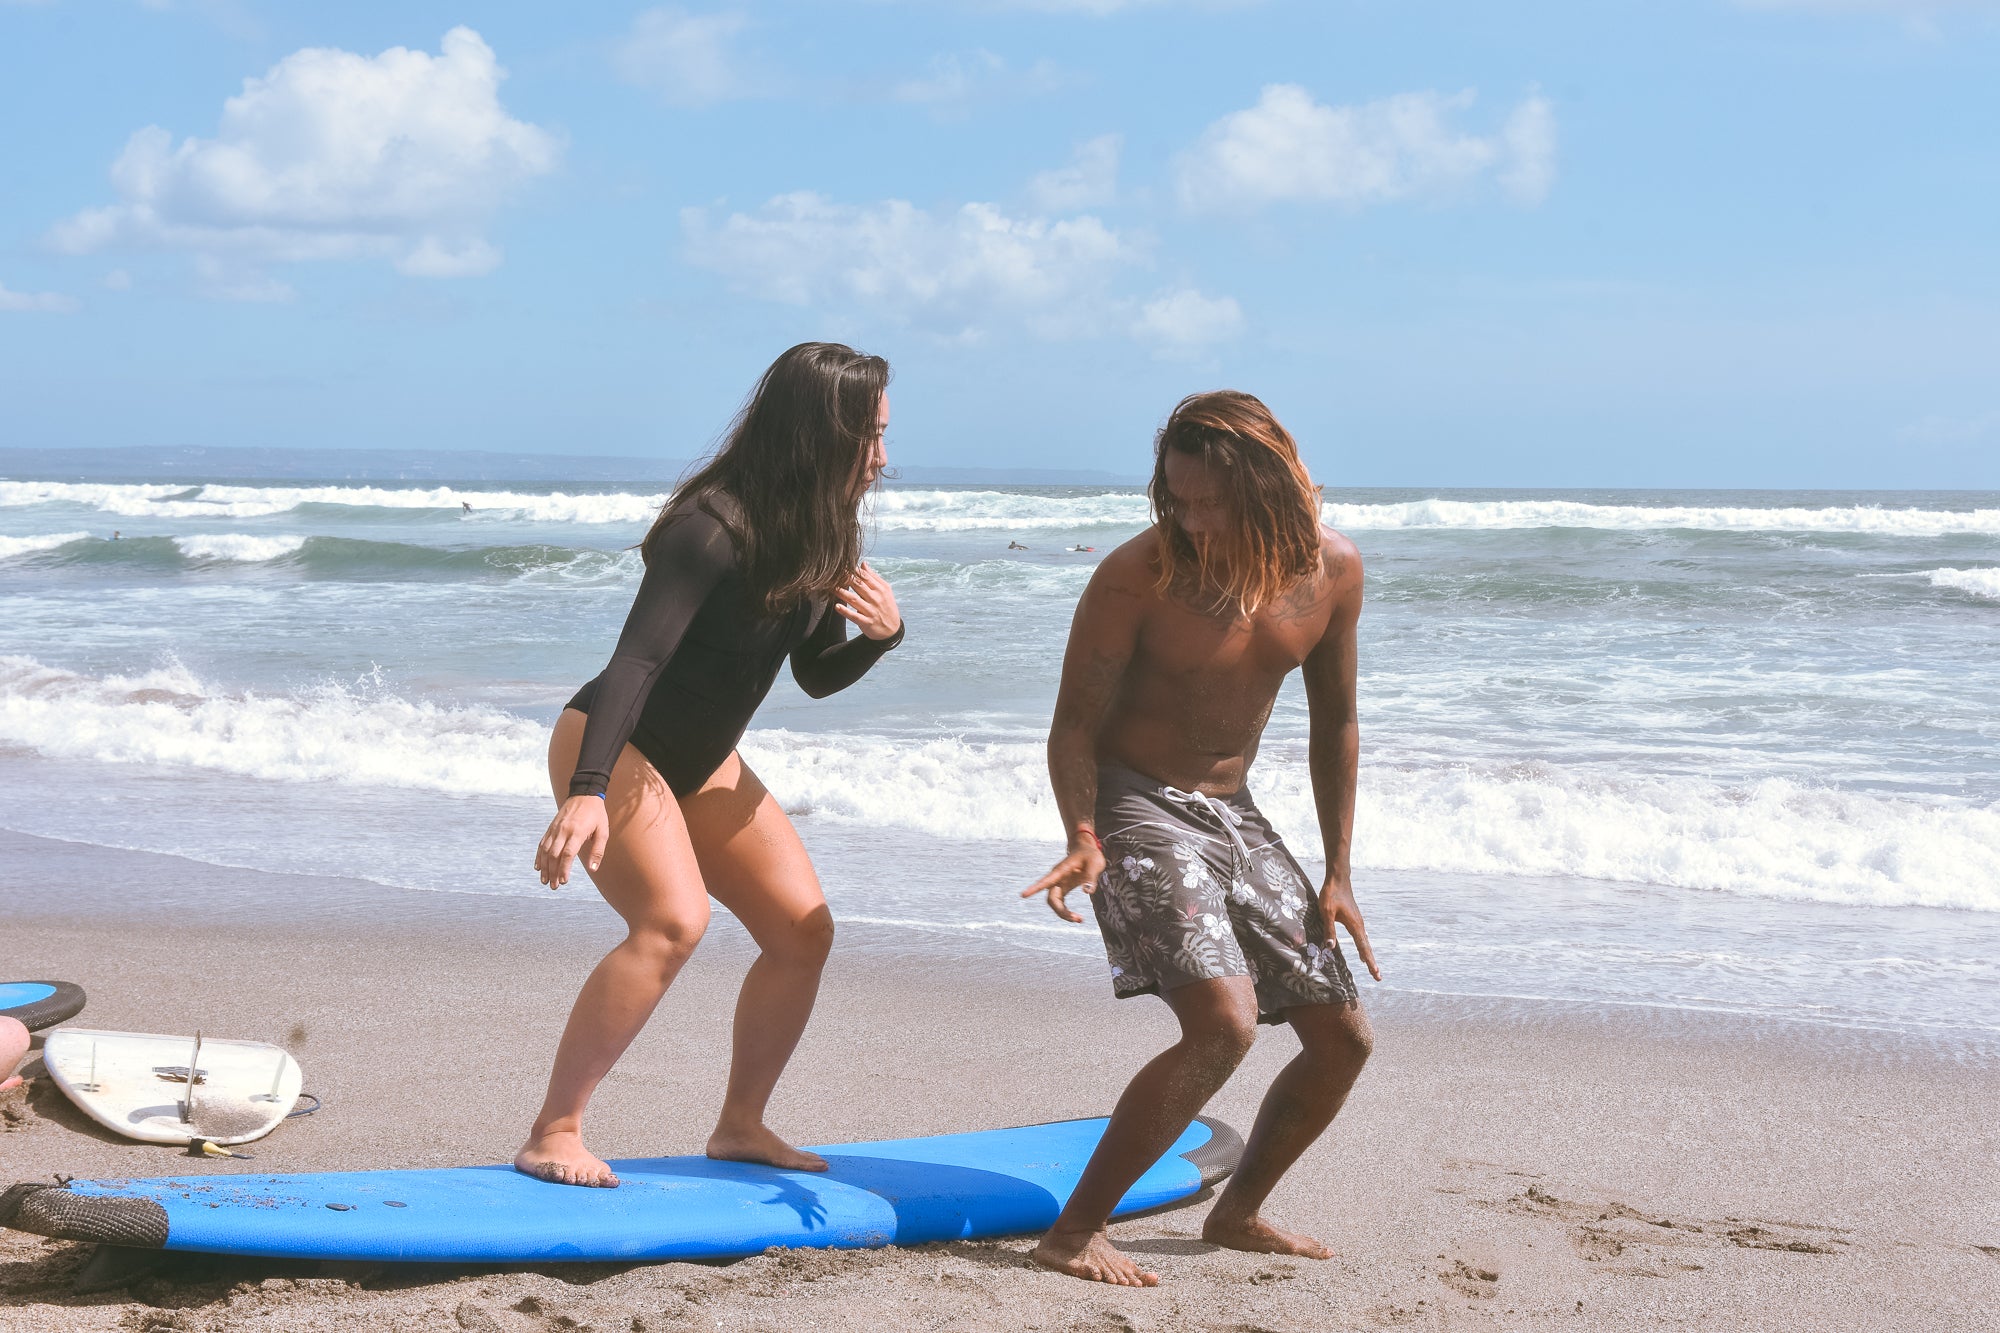 8 Things To Know Before Surfing For The First Time